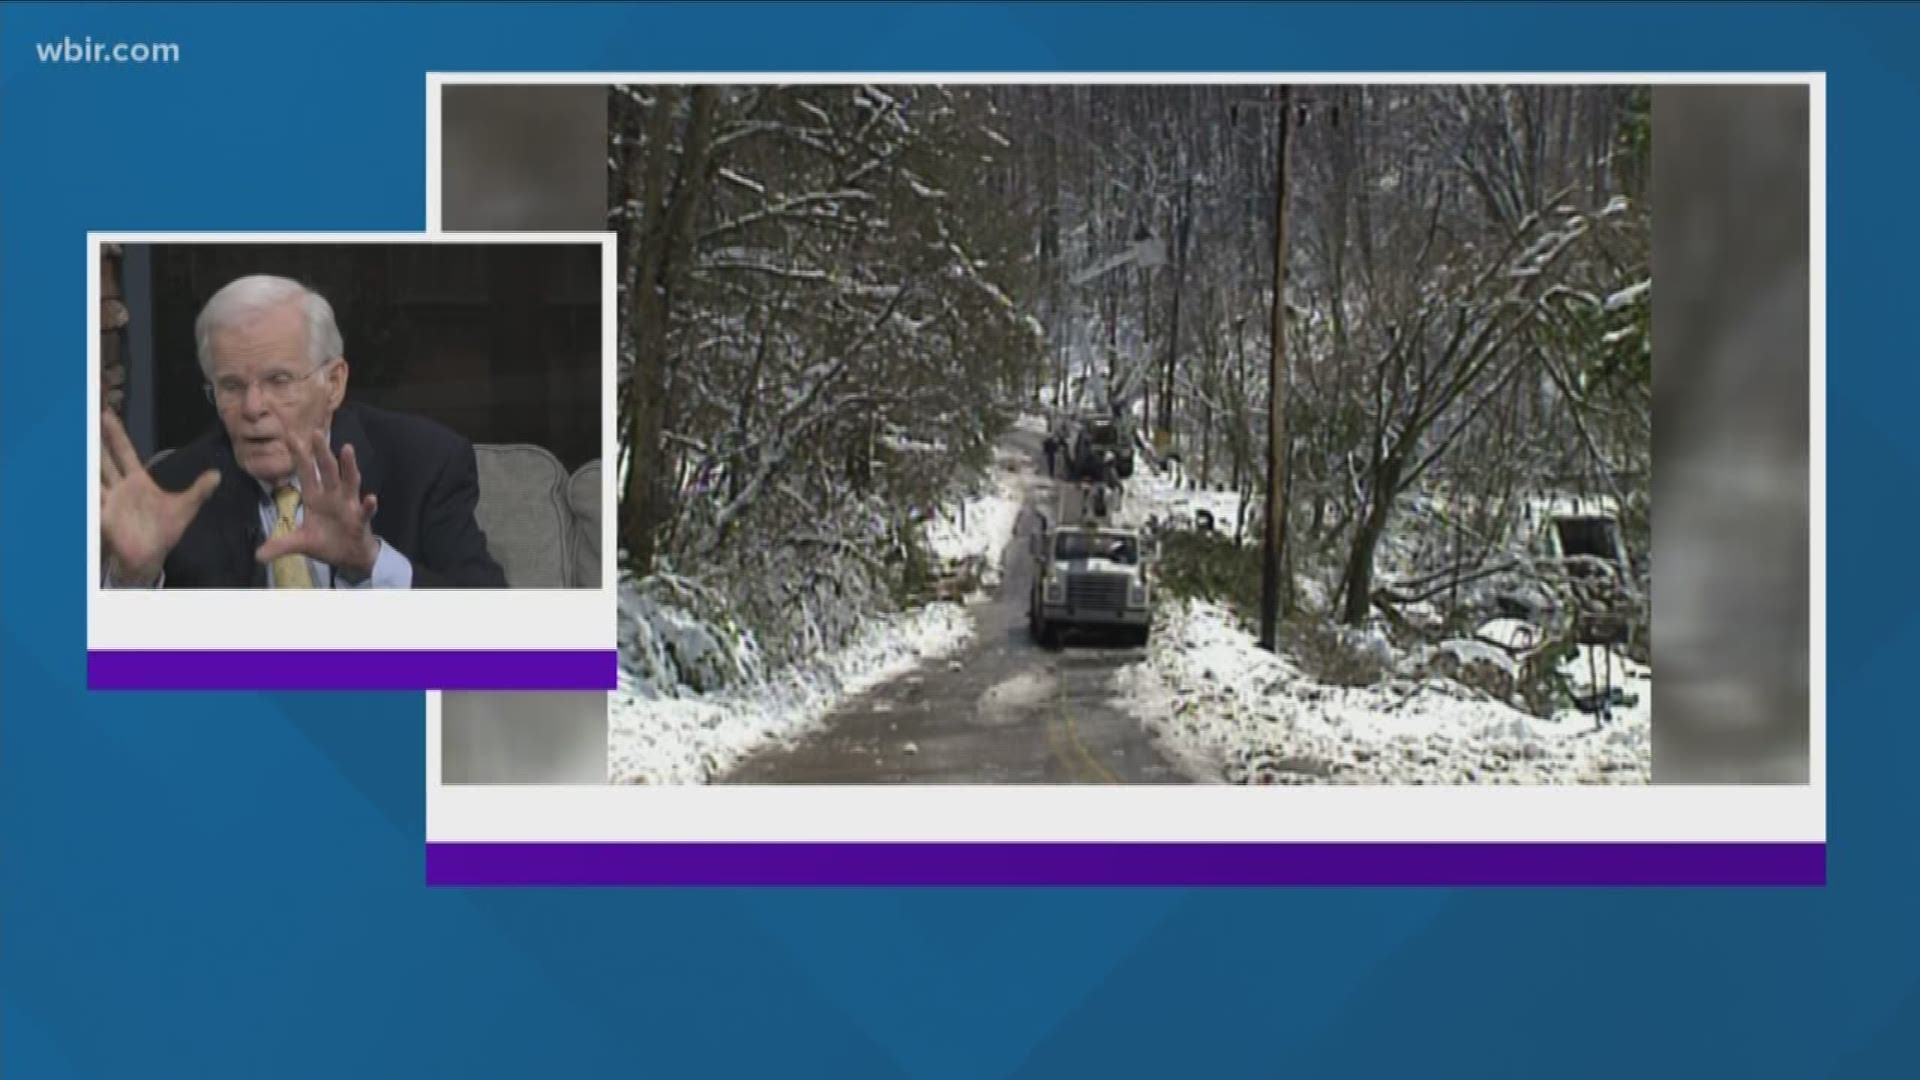 WBIR anchor emeritus Bill Williams remembers the storm that dumped more than a foot of snow on East Tennessee.